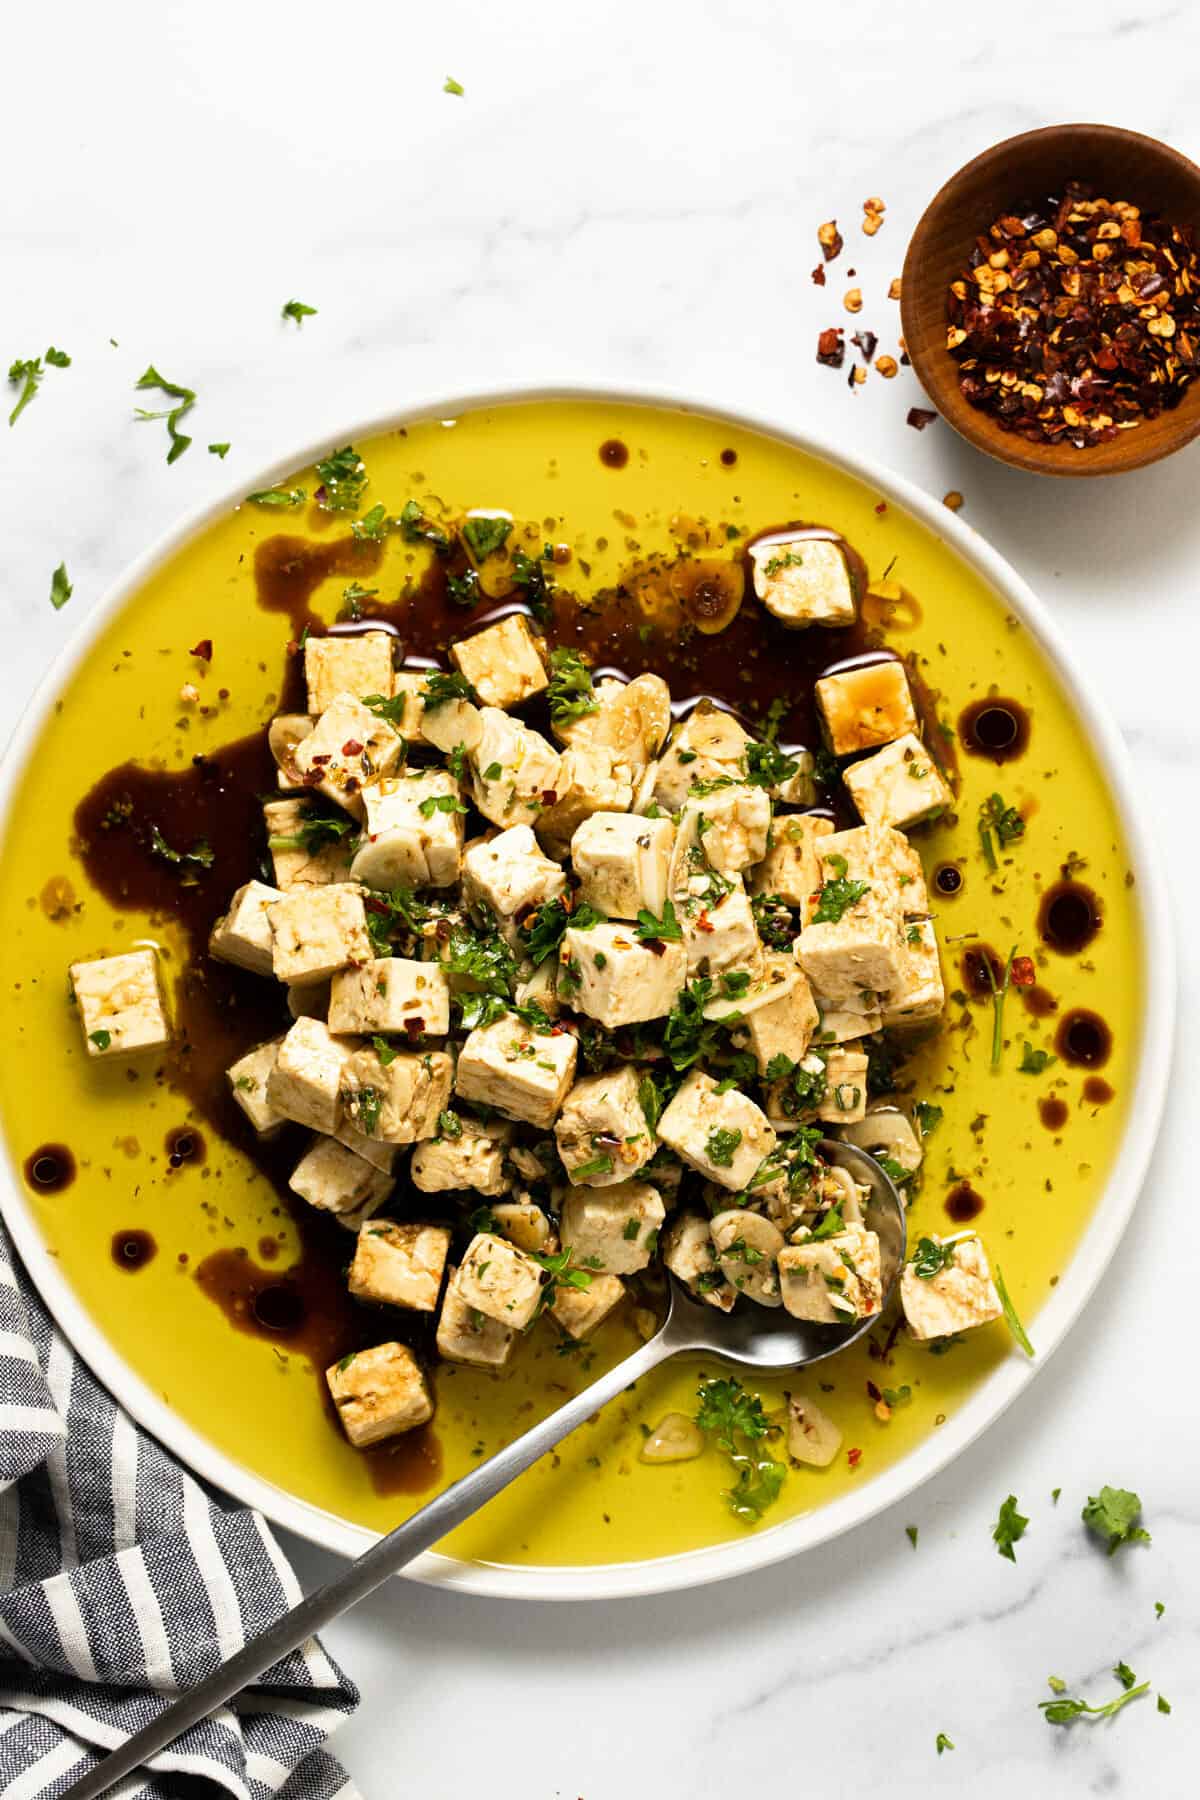 White plate filled with marinated squares of feta garnished with parsley